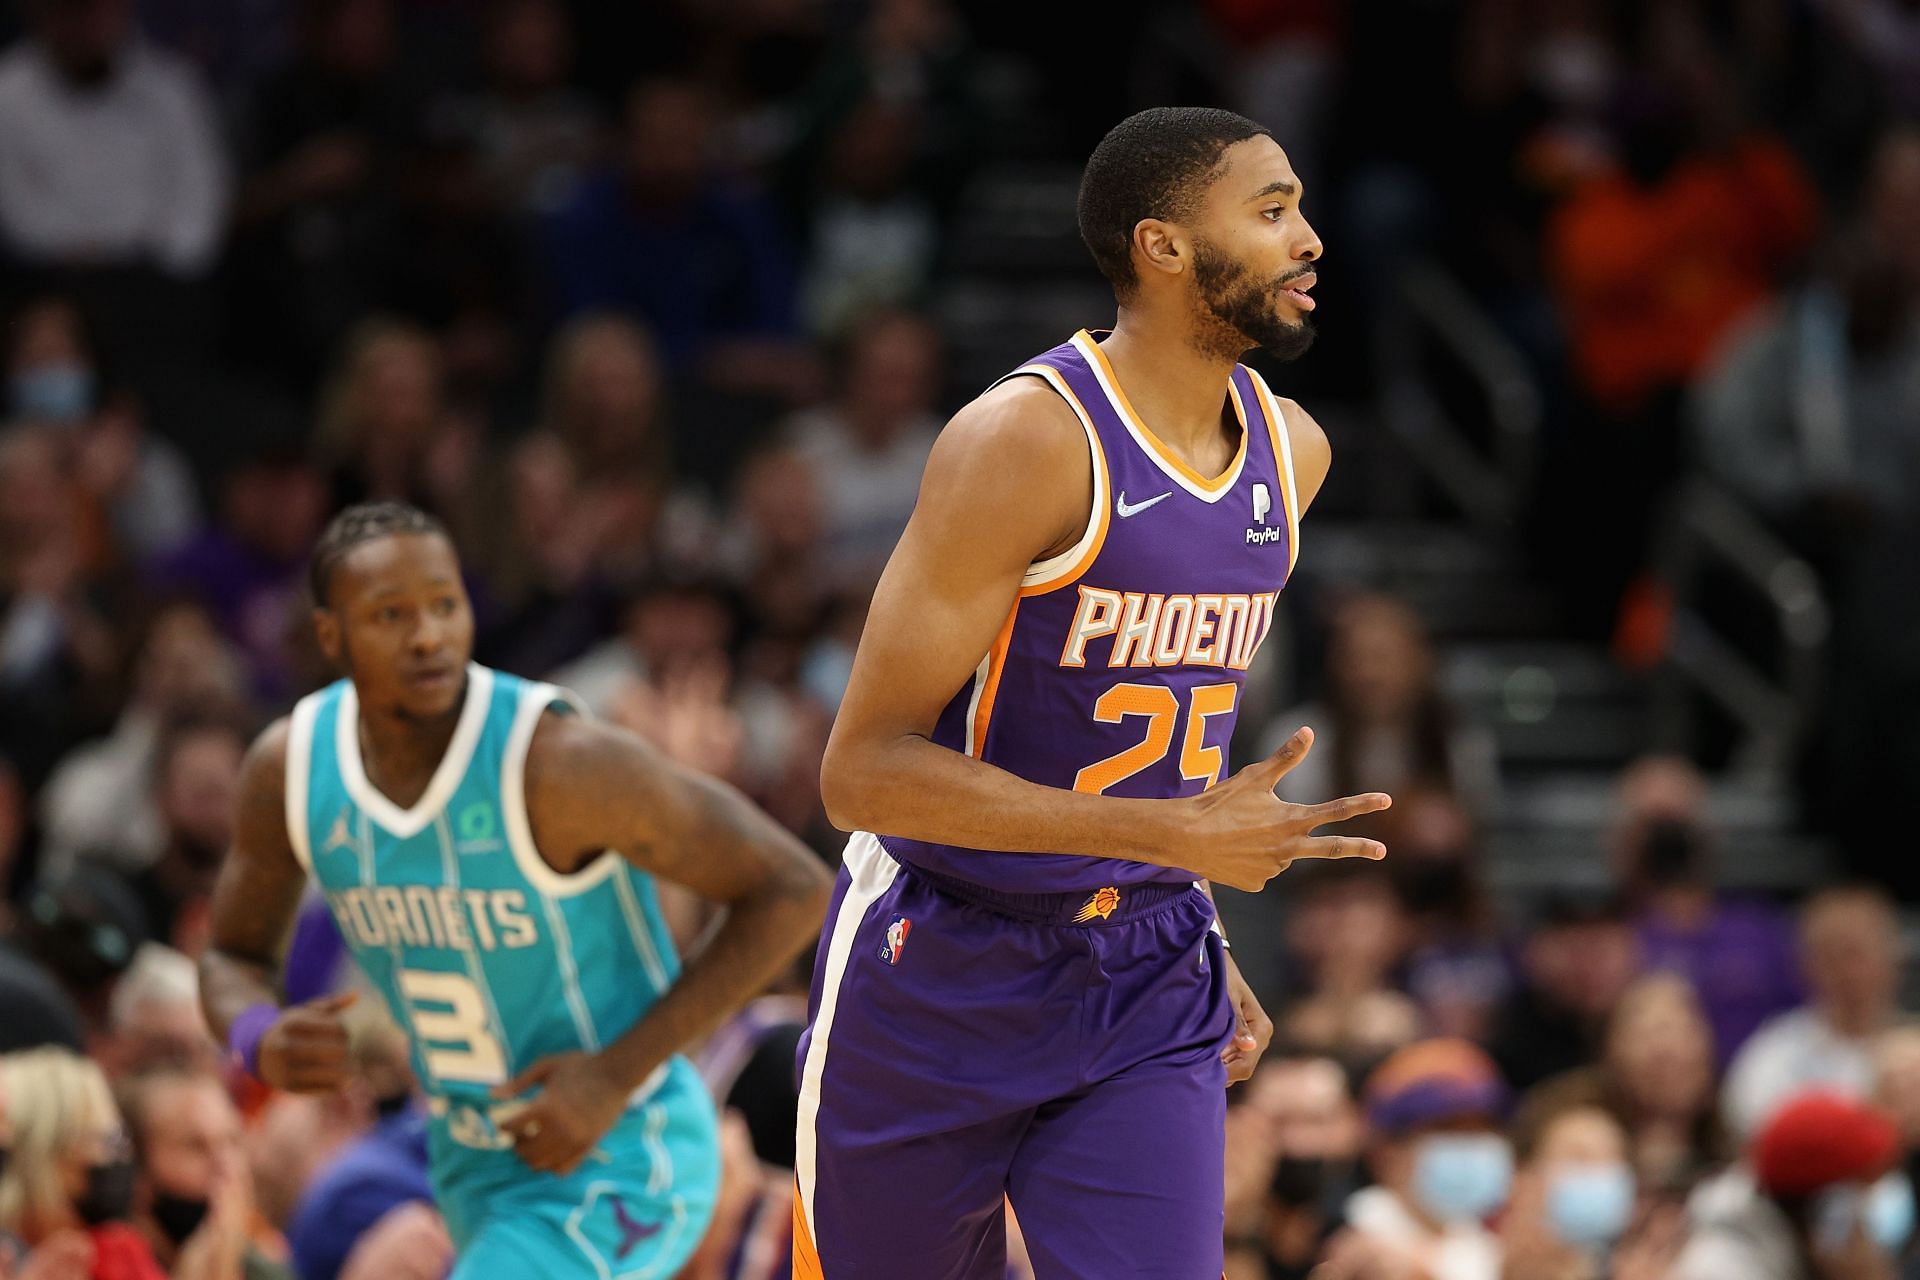 Phoenix Suns wing Mikal Bridges has made noise as a potential Defensive Player of the Year